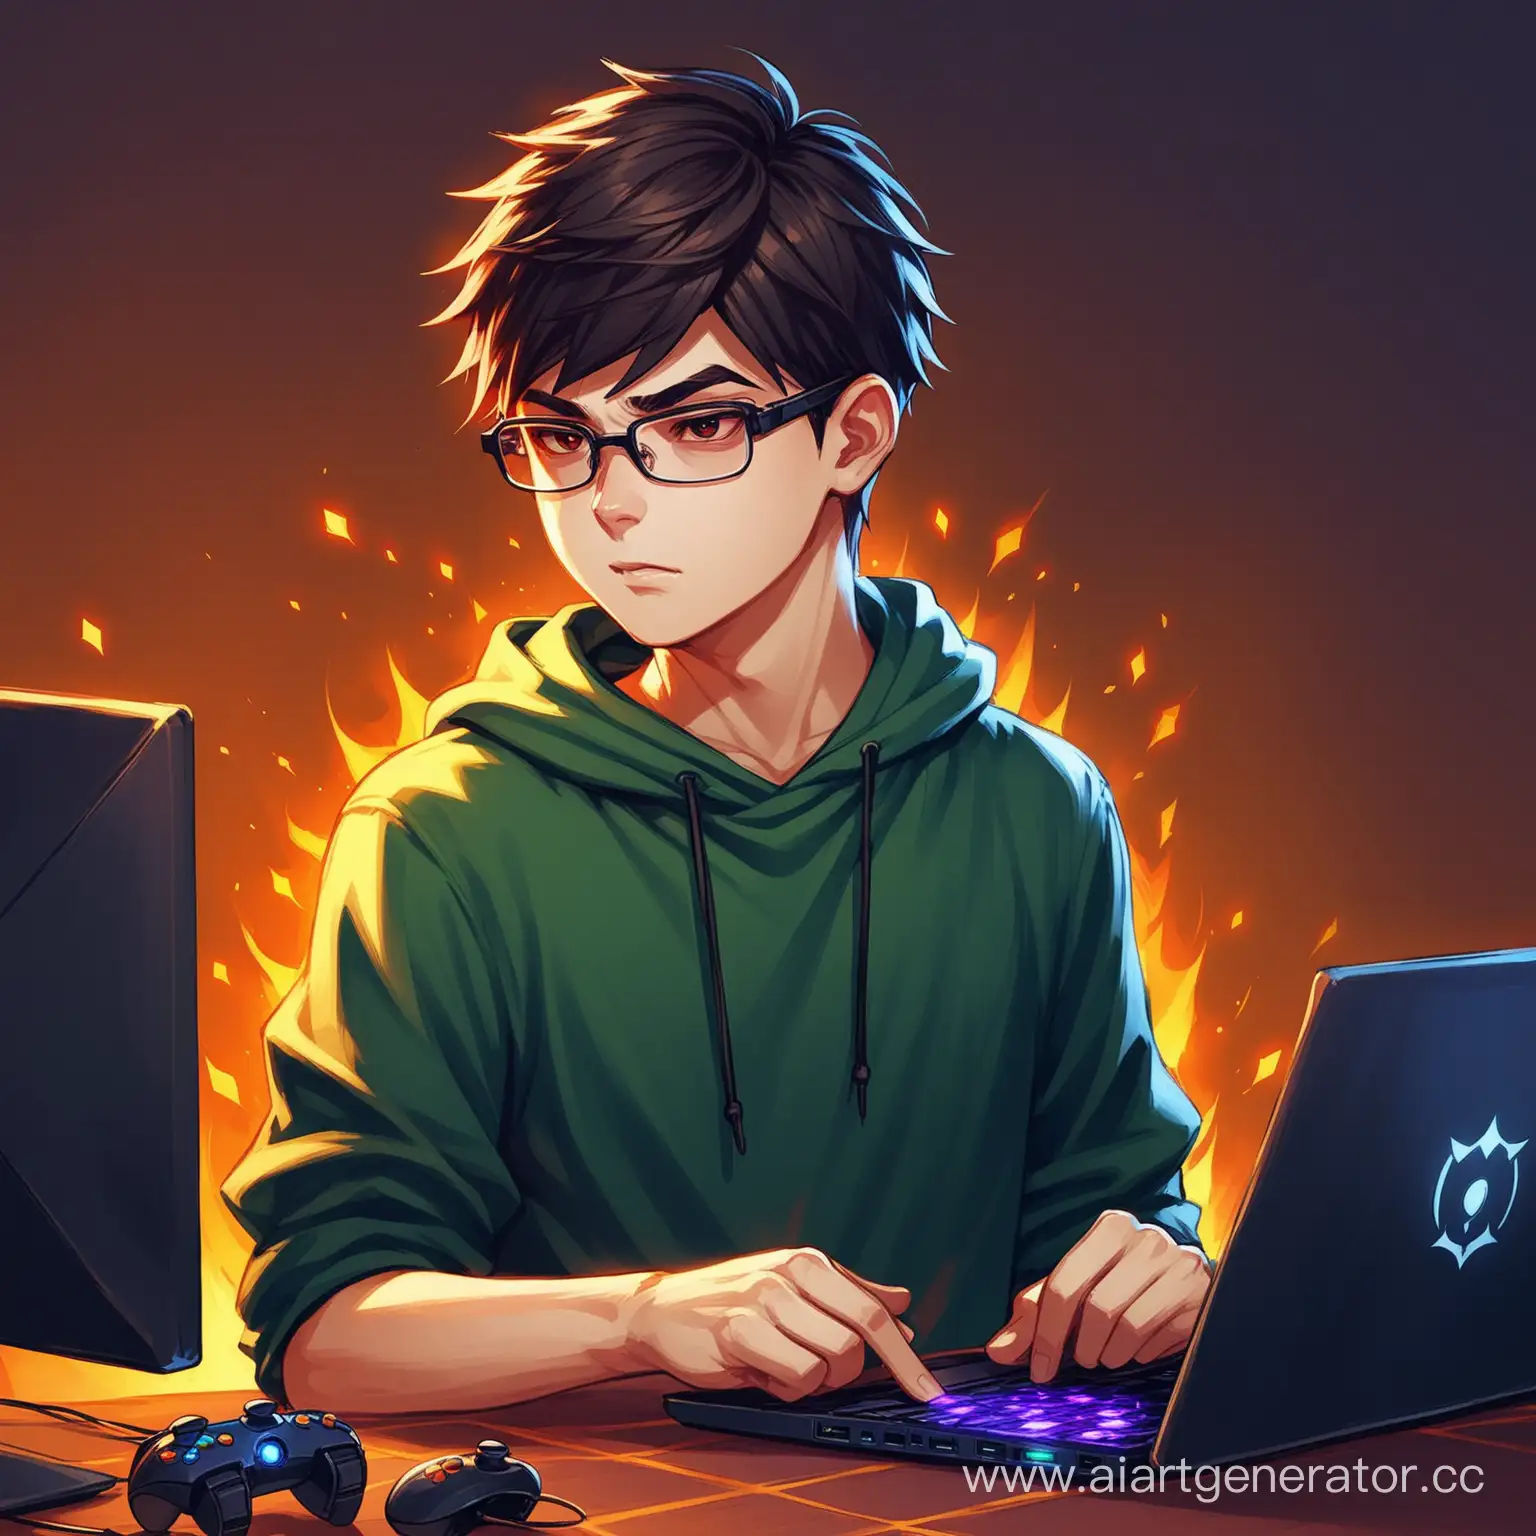 Boy-with-Dissociative-Identity-Disorder-Engaged-in-Dota-2-Gaming